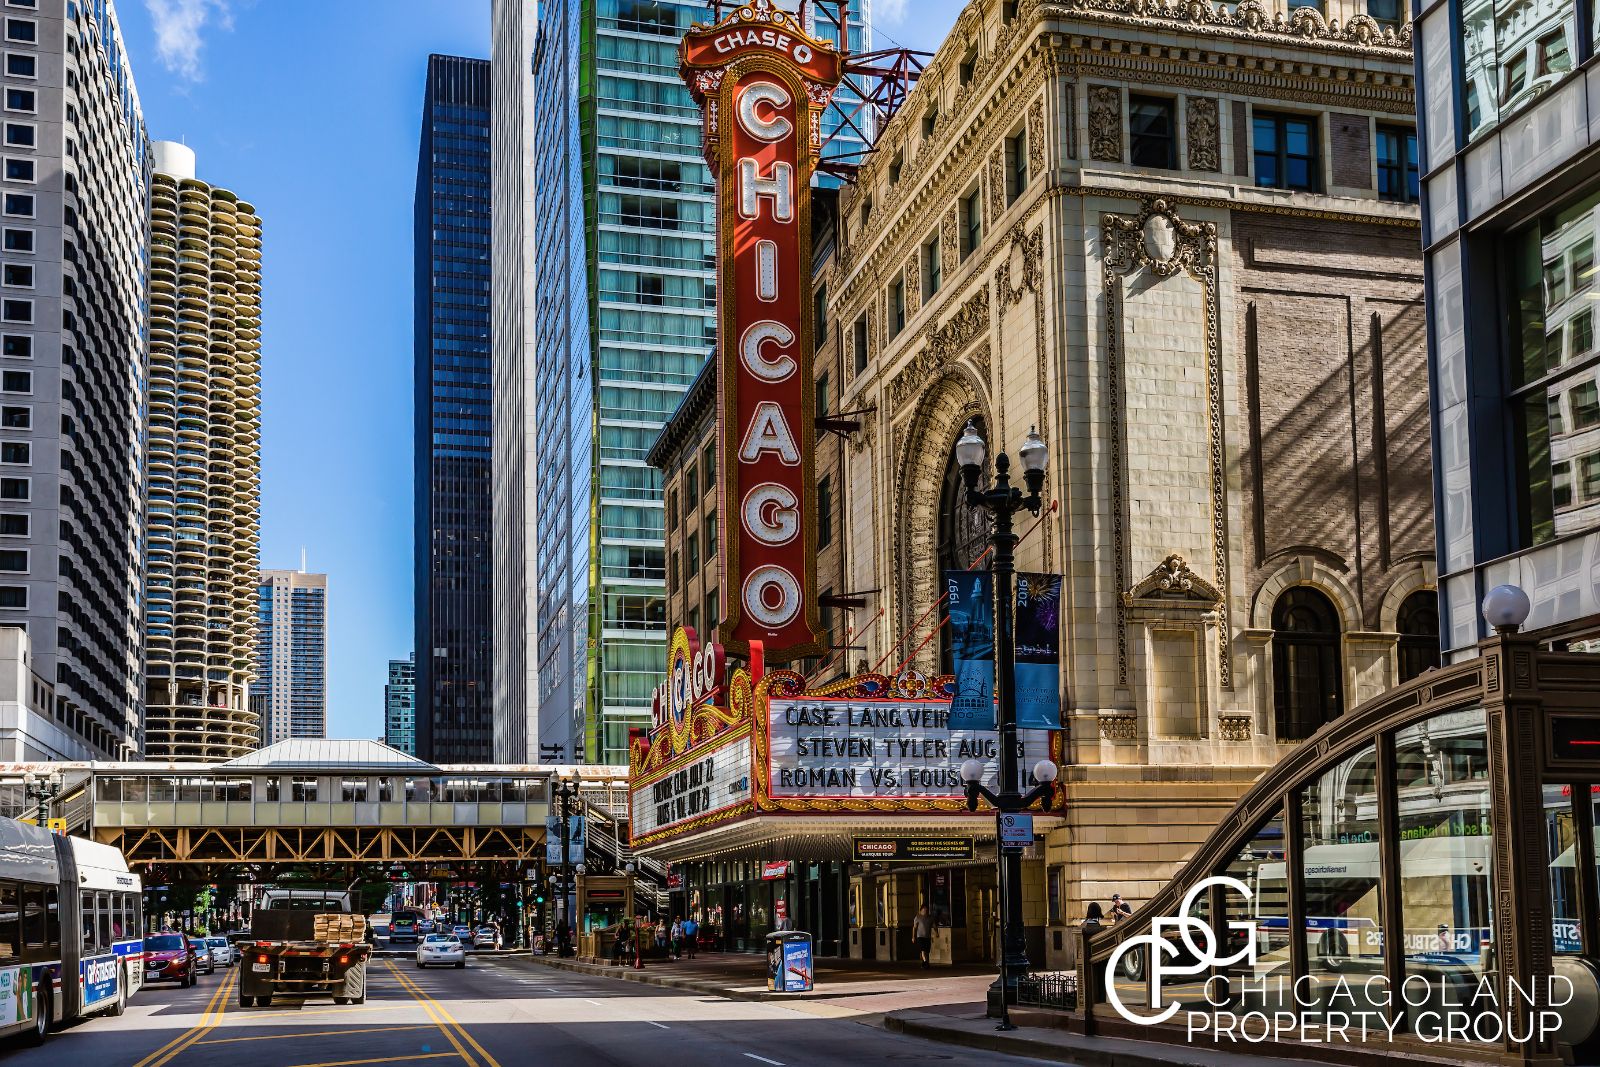 Chicago Loop | The Loop | Financial District | cpgchicago